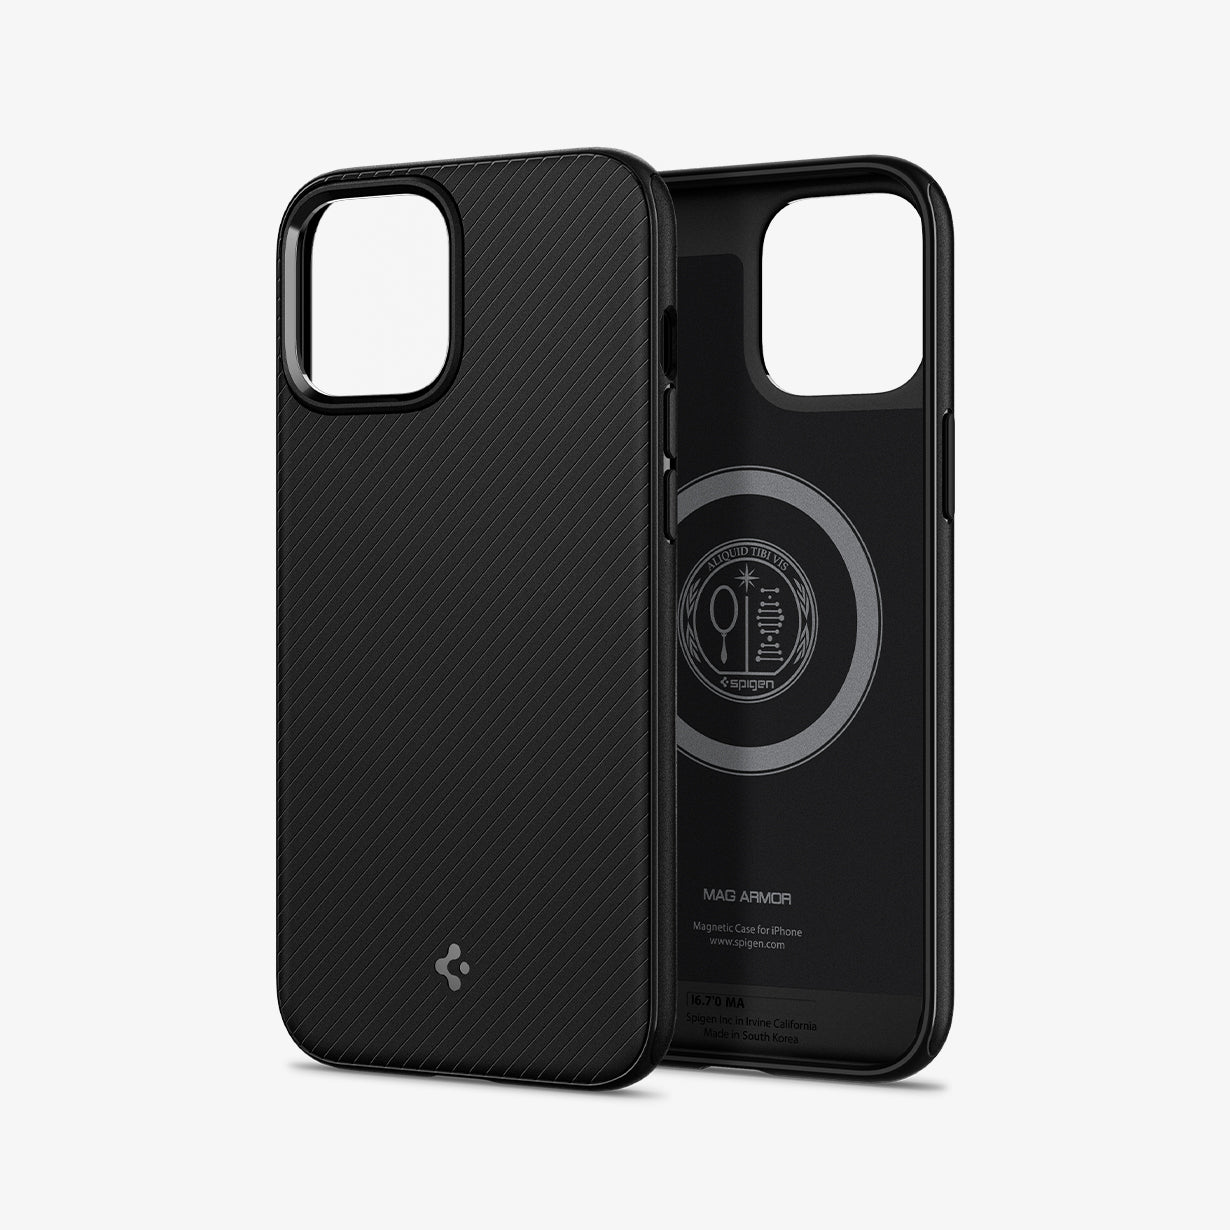 ACS01864 - iPhone 12 Pro Max Case MagArmor in black showing the back and inside with no device